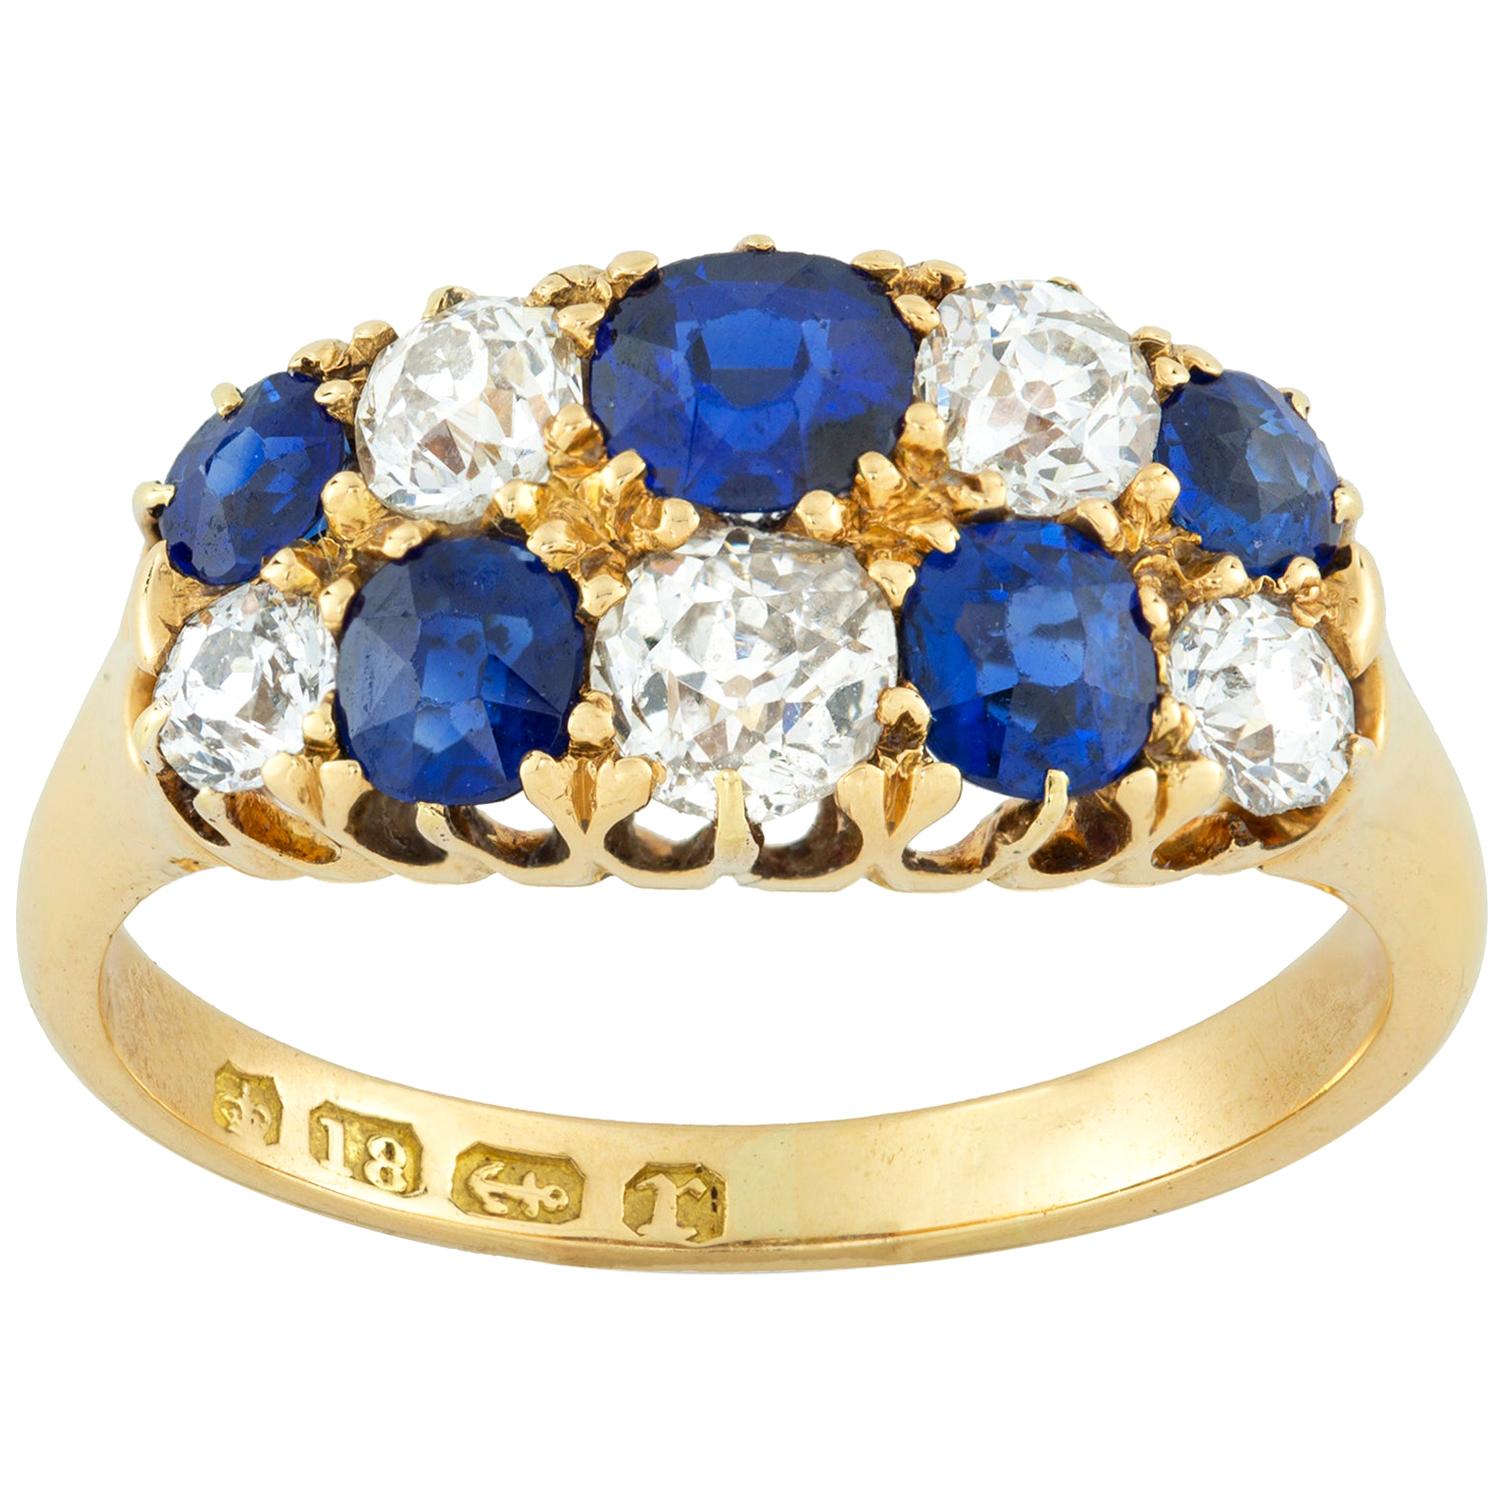 Late Victorian Double-Row Sapphire and Diamond Ring